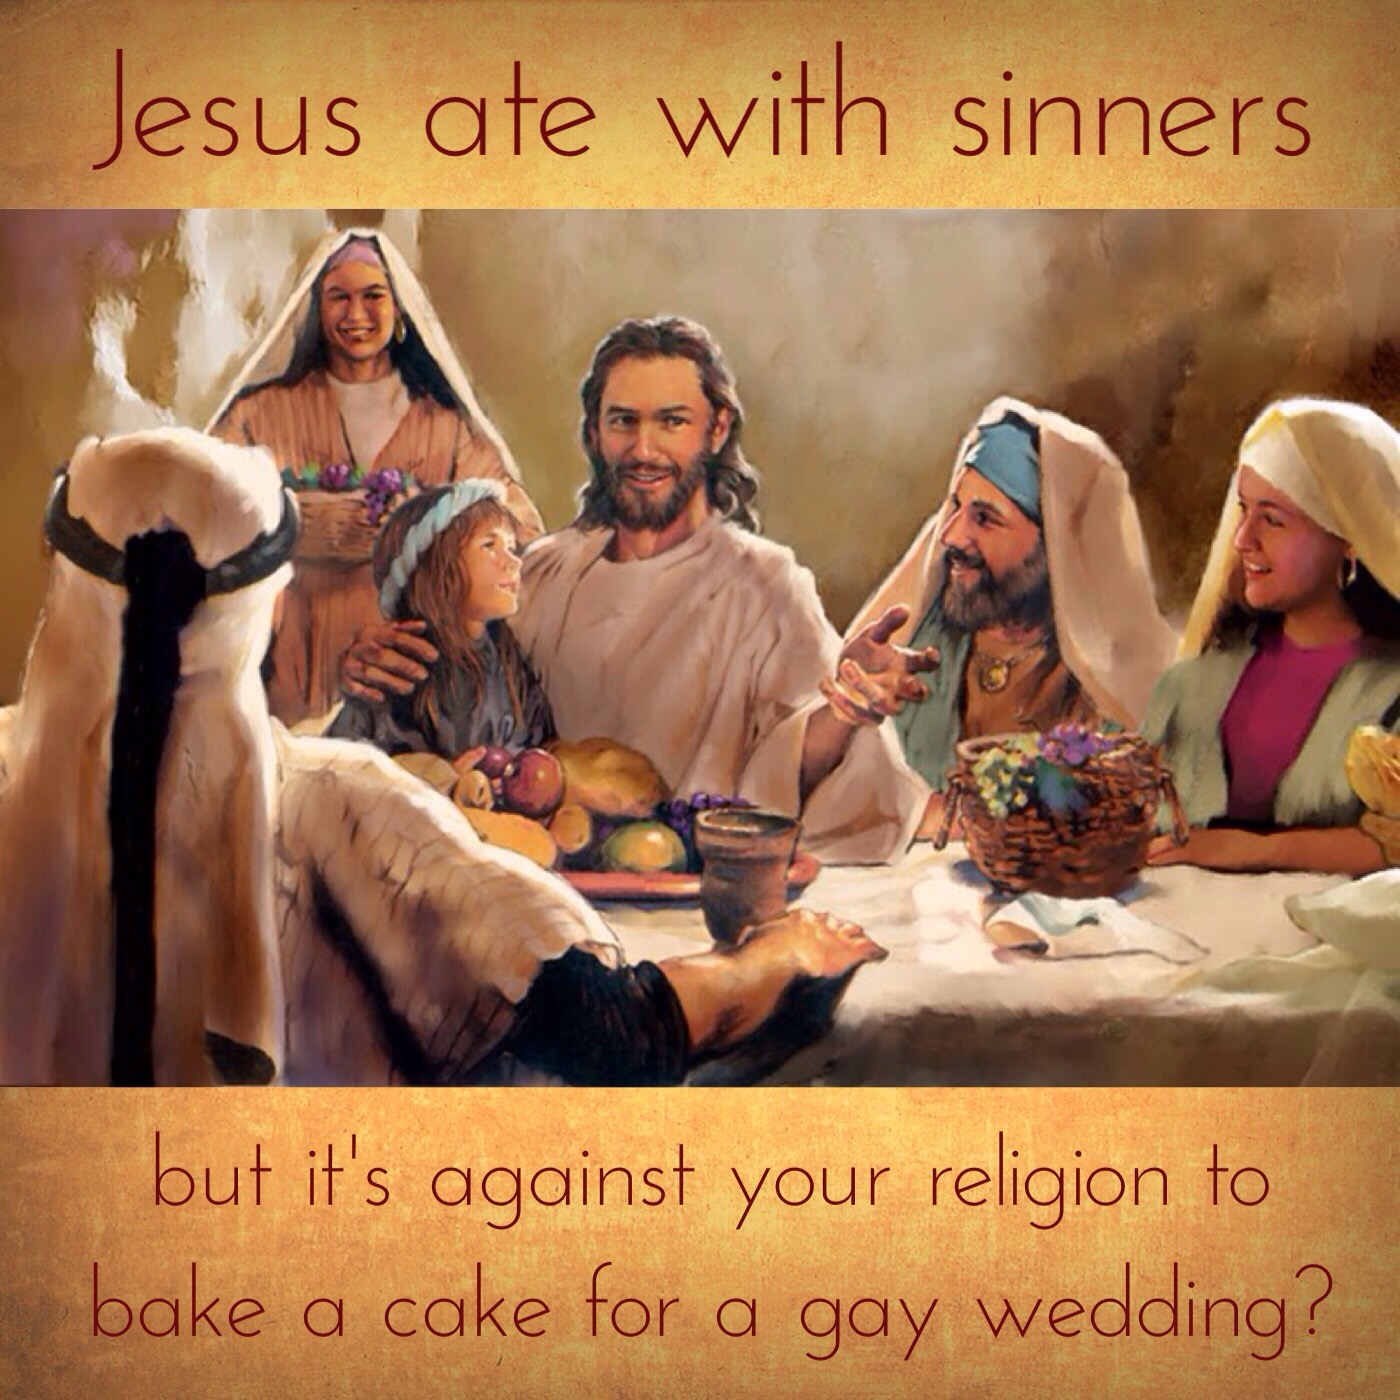 Eating with sinners